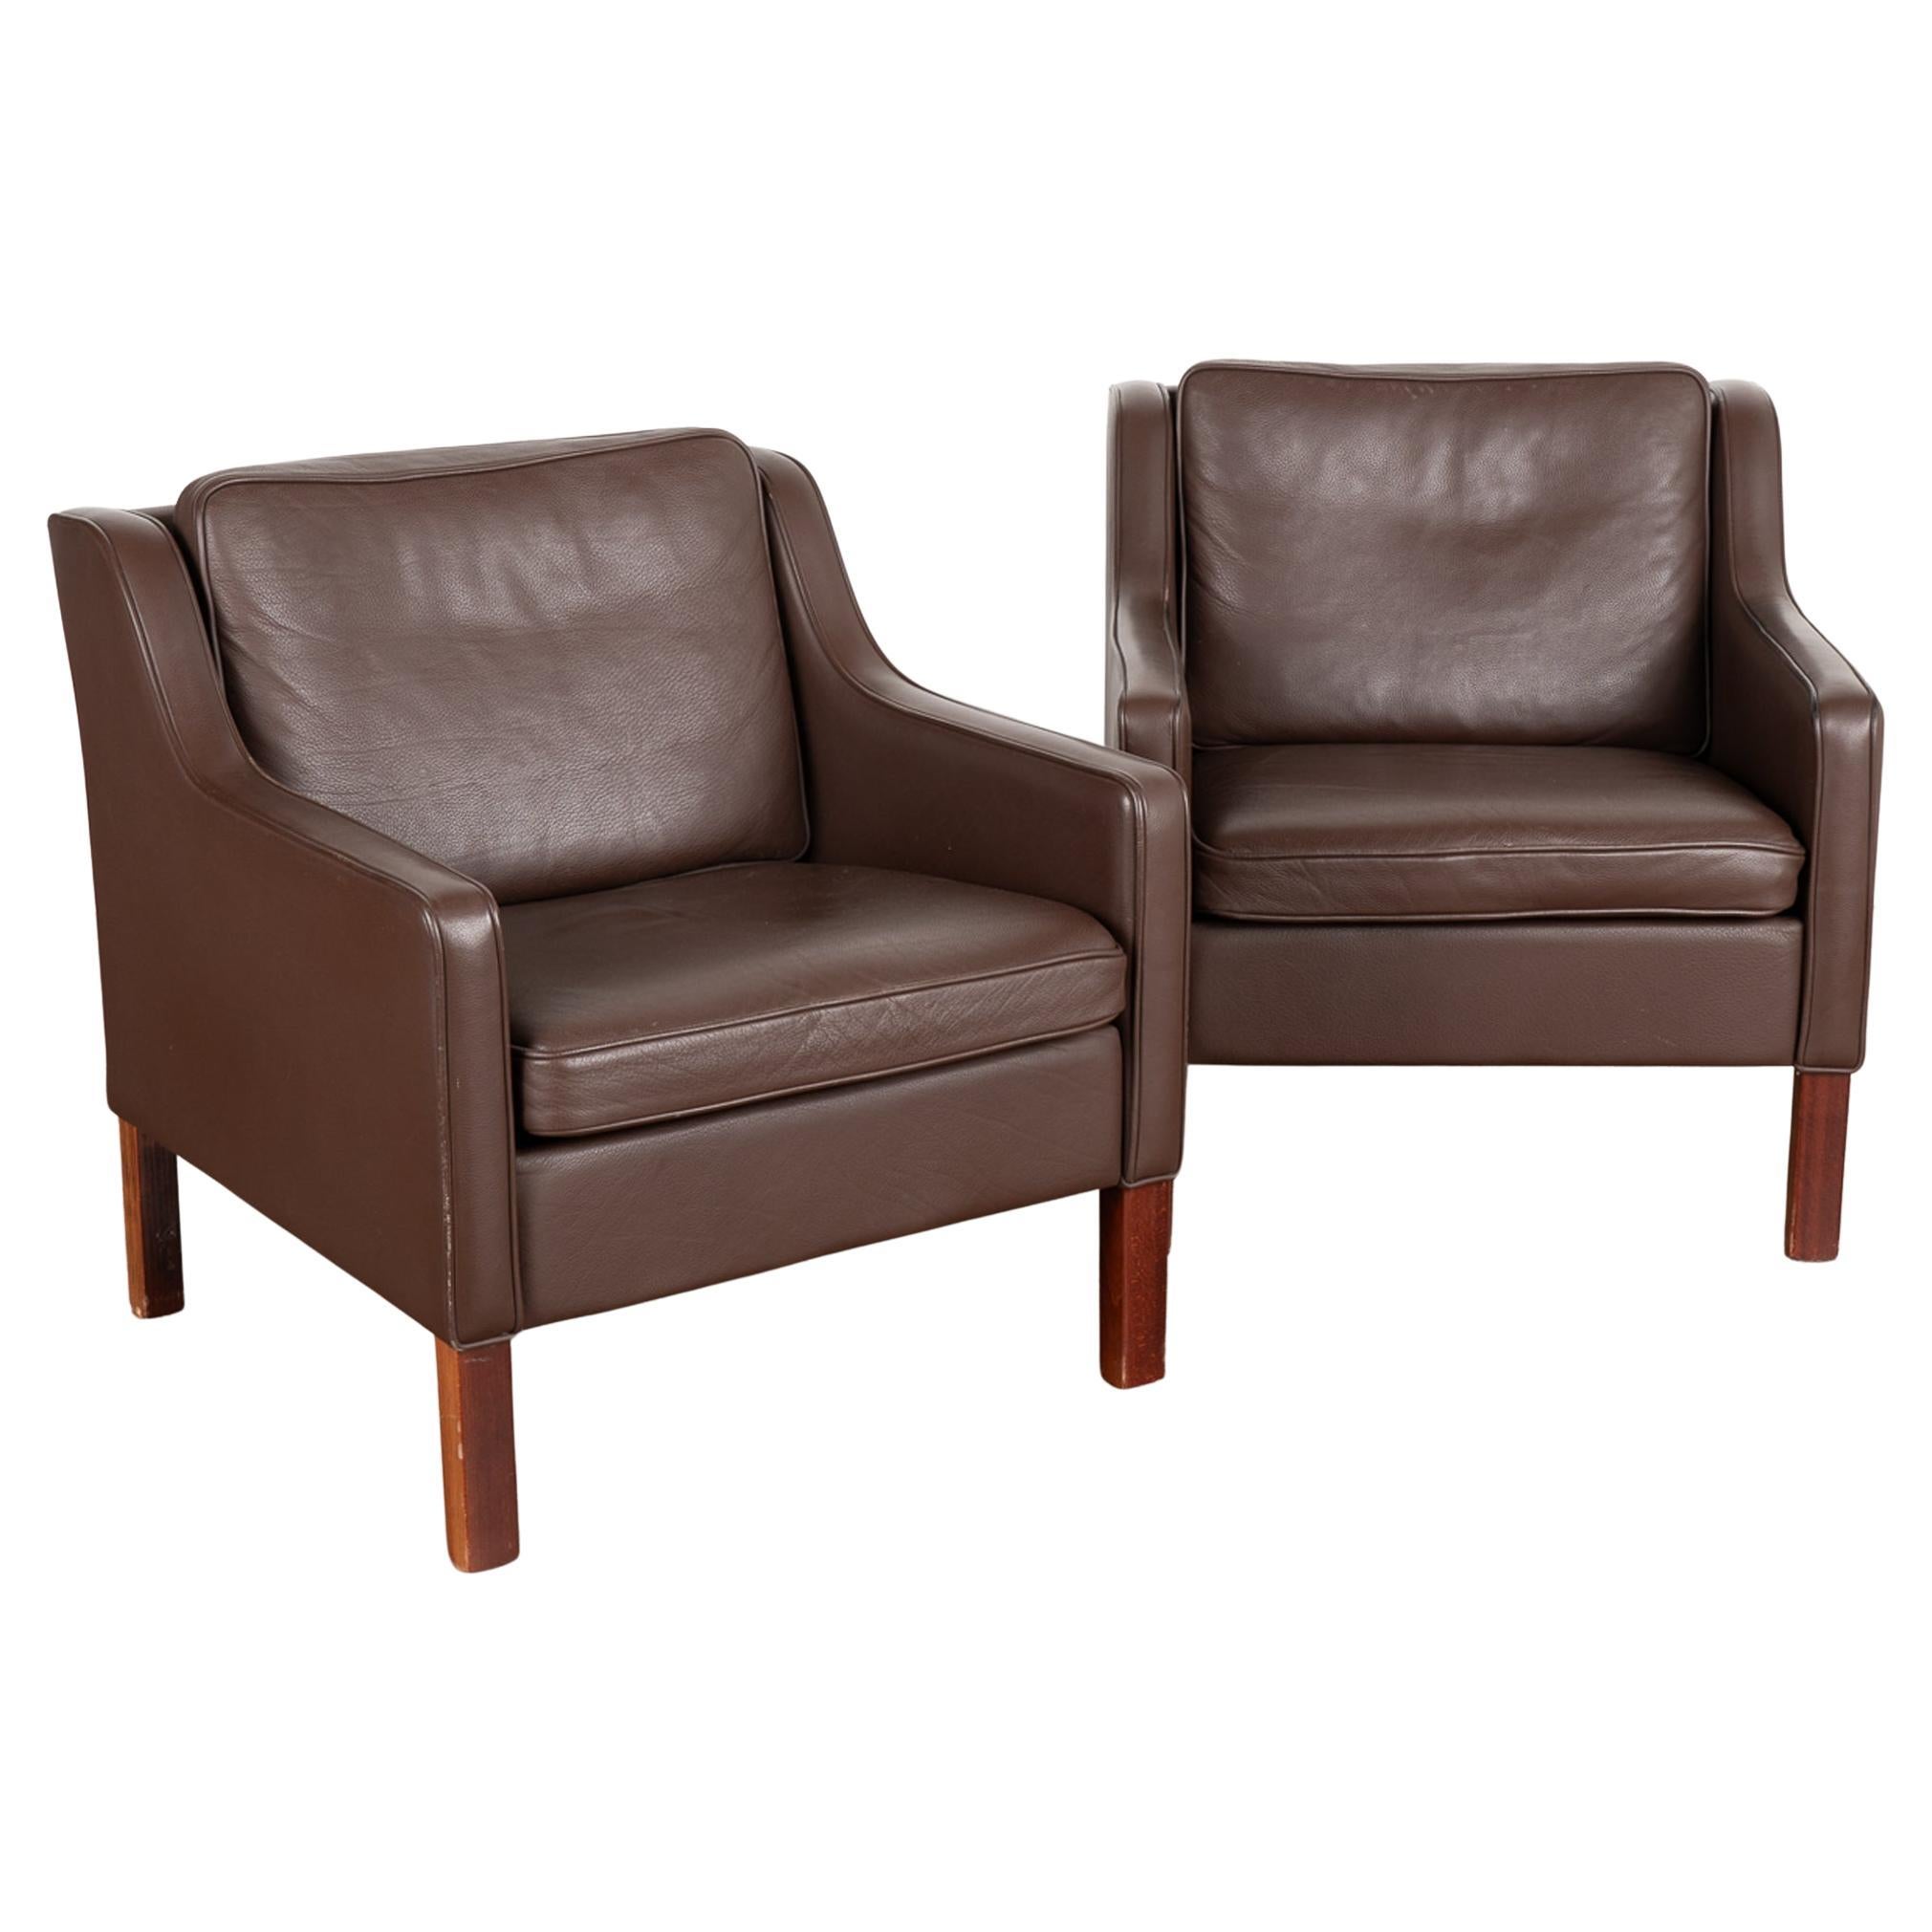 Pair, Midcentury Brown Leather Arm Chairs, Denmark, circa 1960-70